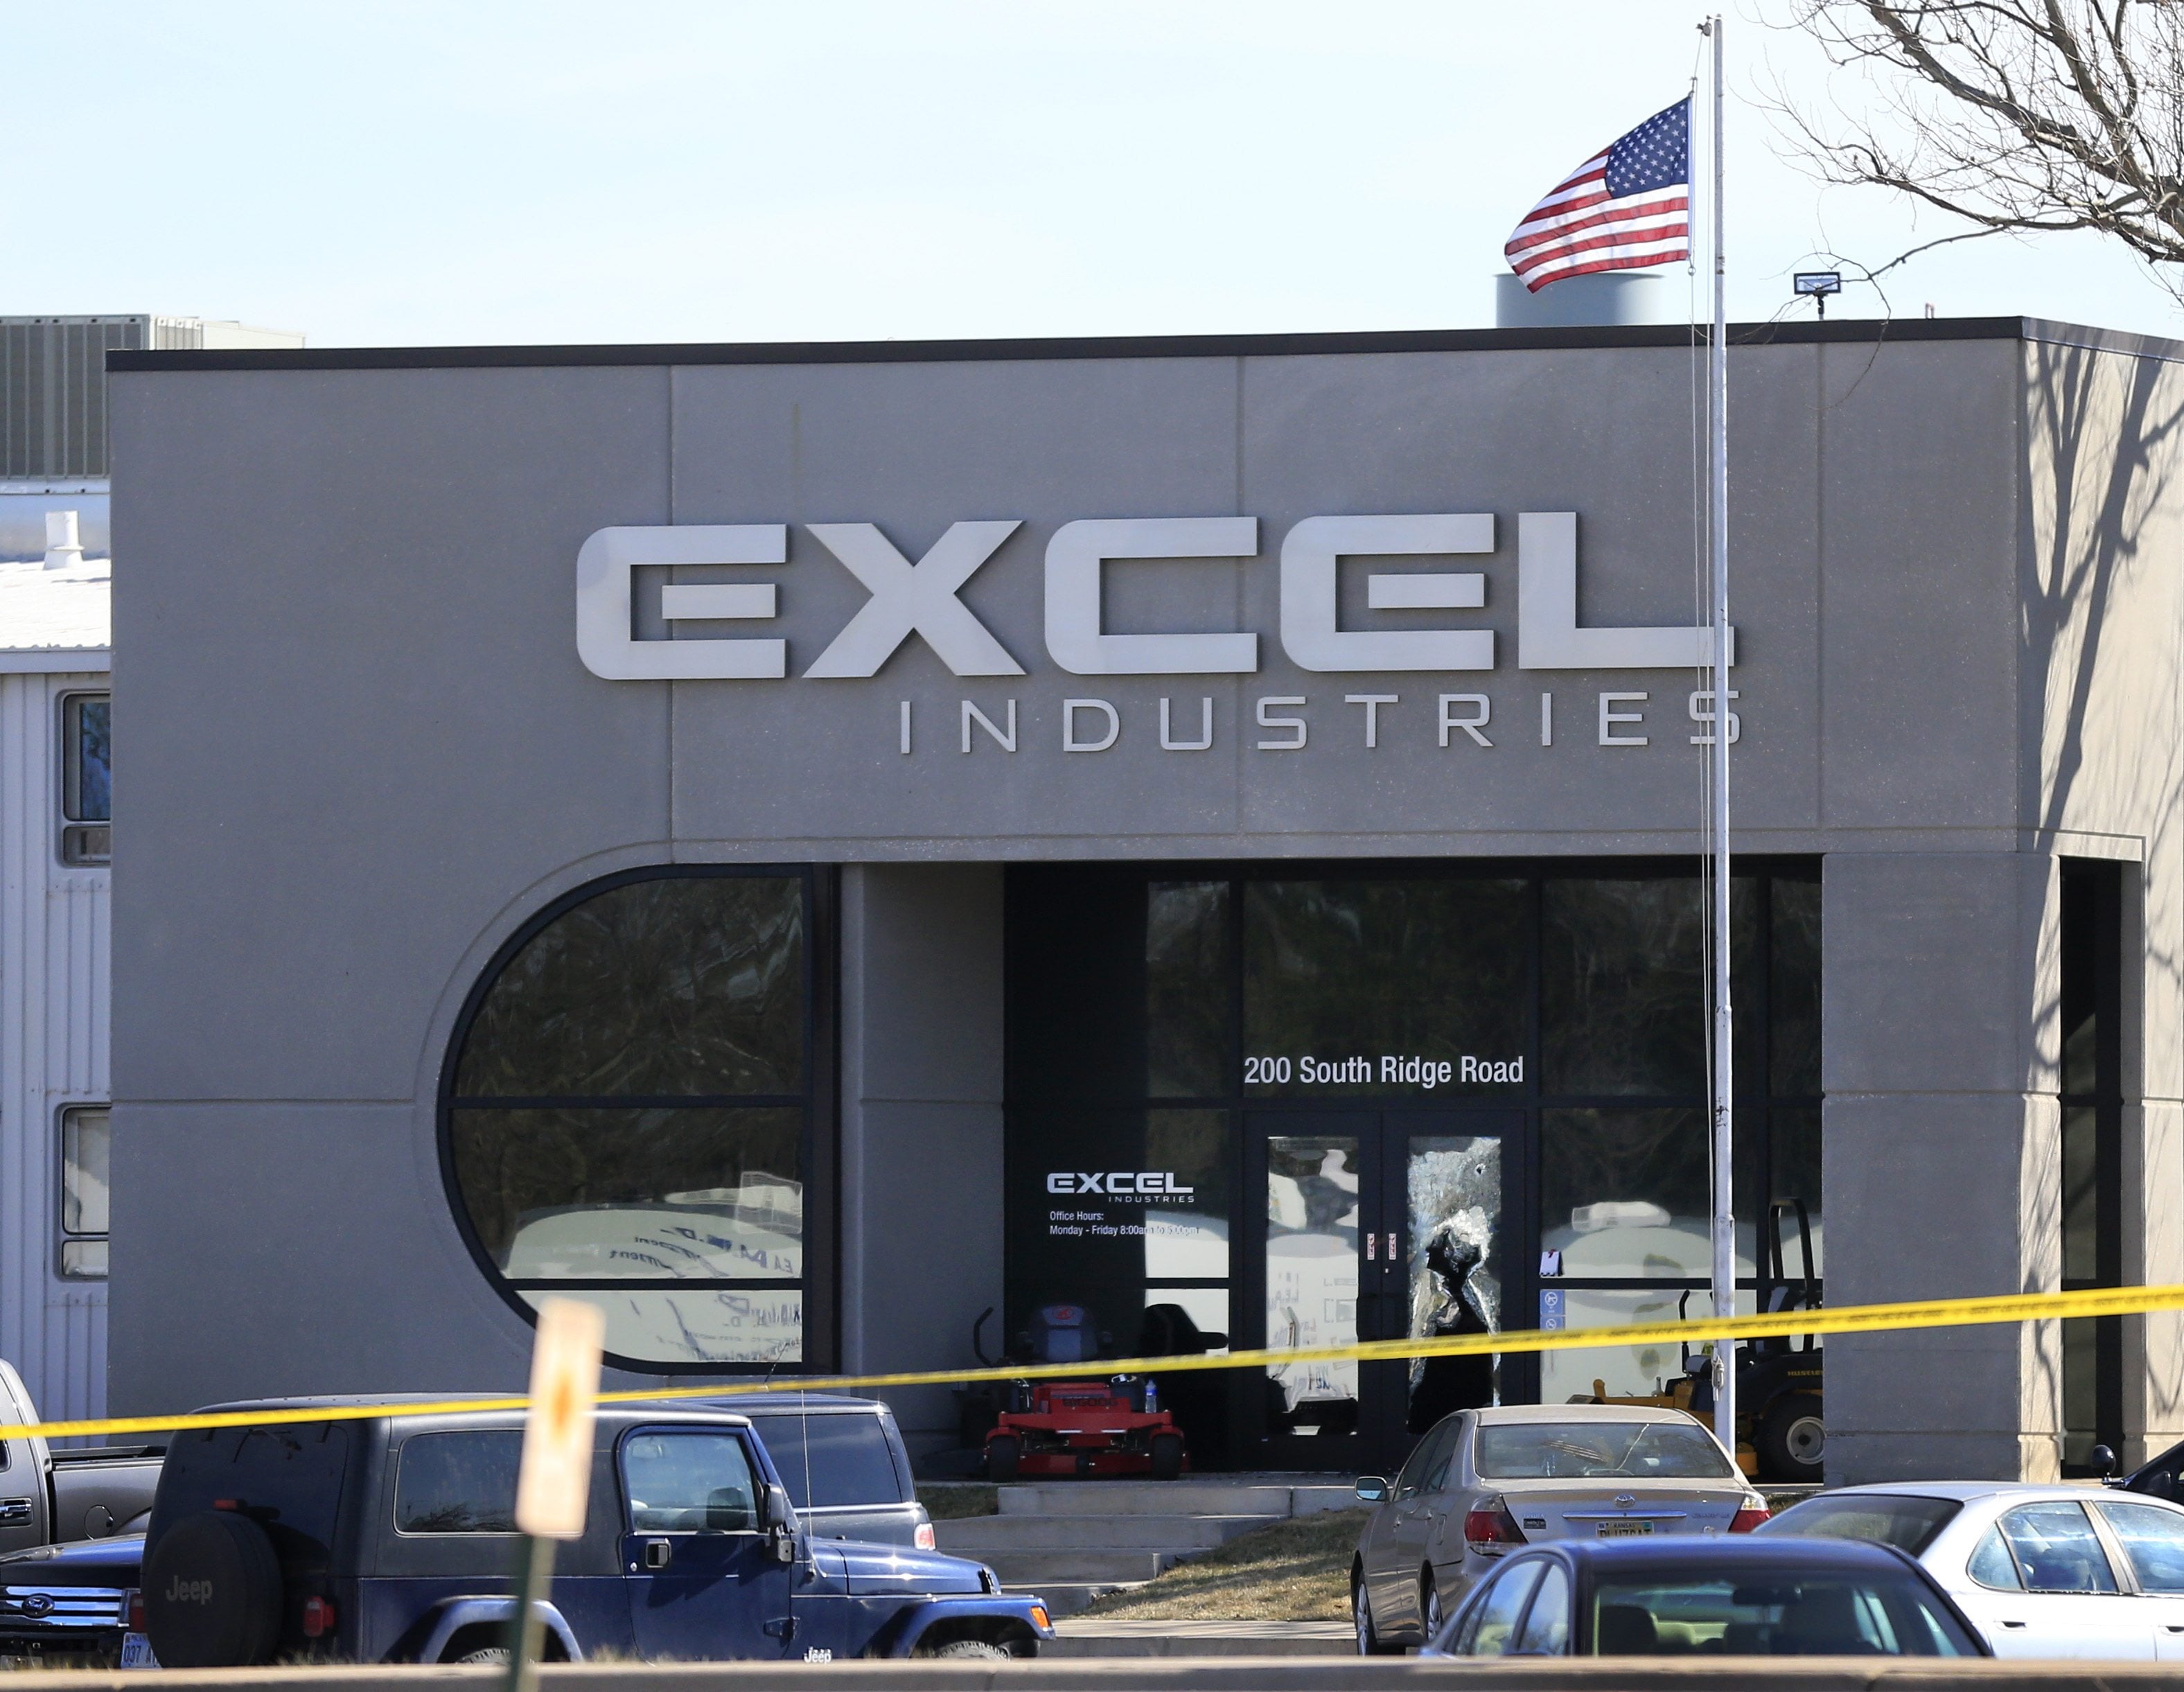 Shattered glass and bullet holes are seen Friday at the front door of Excel Industries in Hesston, Kan. Harvey County Sheriff T. Walton identified the gunman as Cedric Ford, who stormed into the factory where he worked and shot several people. It was the at least the fourth workplace shooting in the U.S. in the past 12 months.